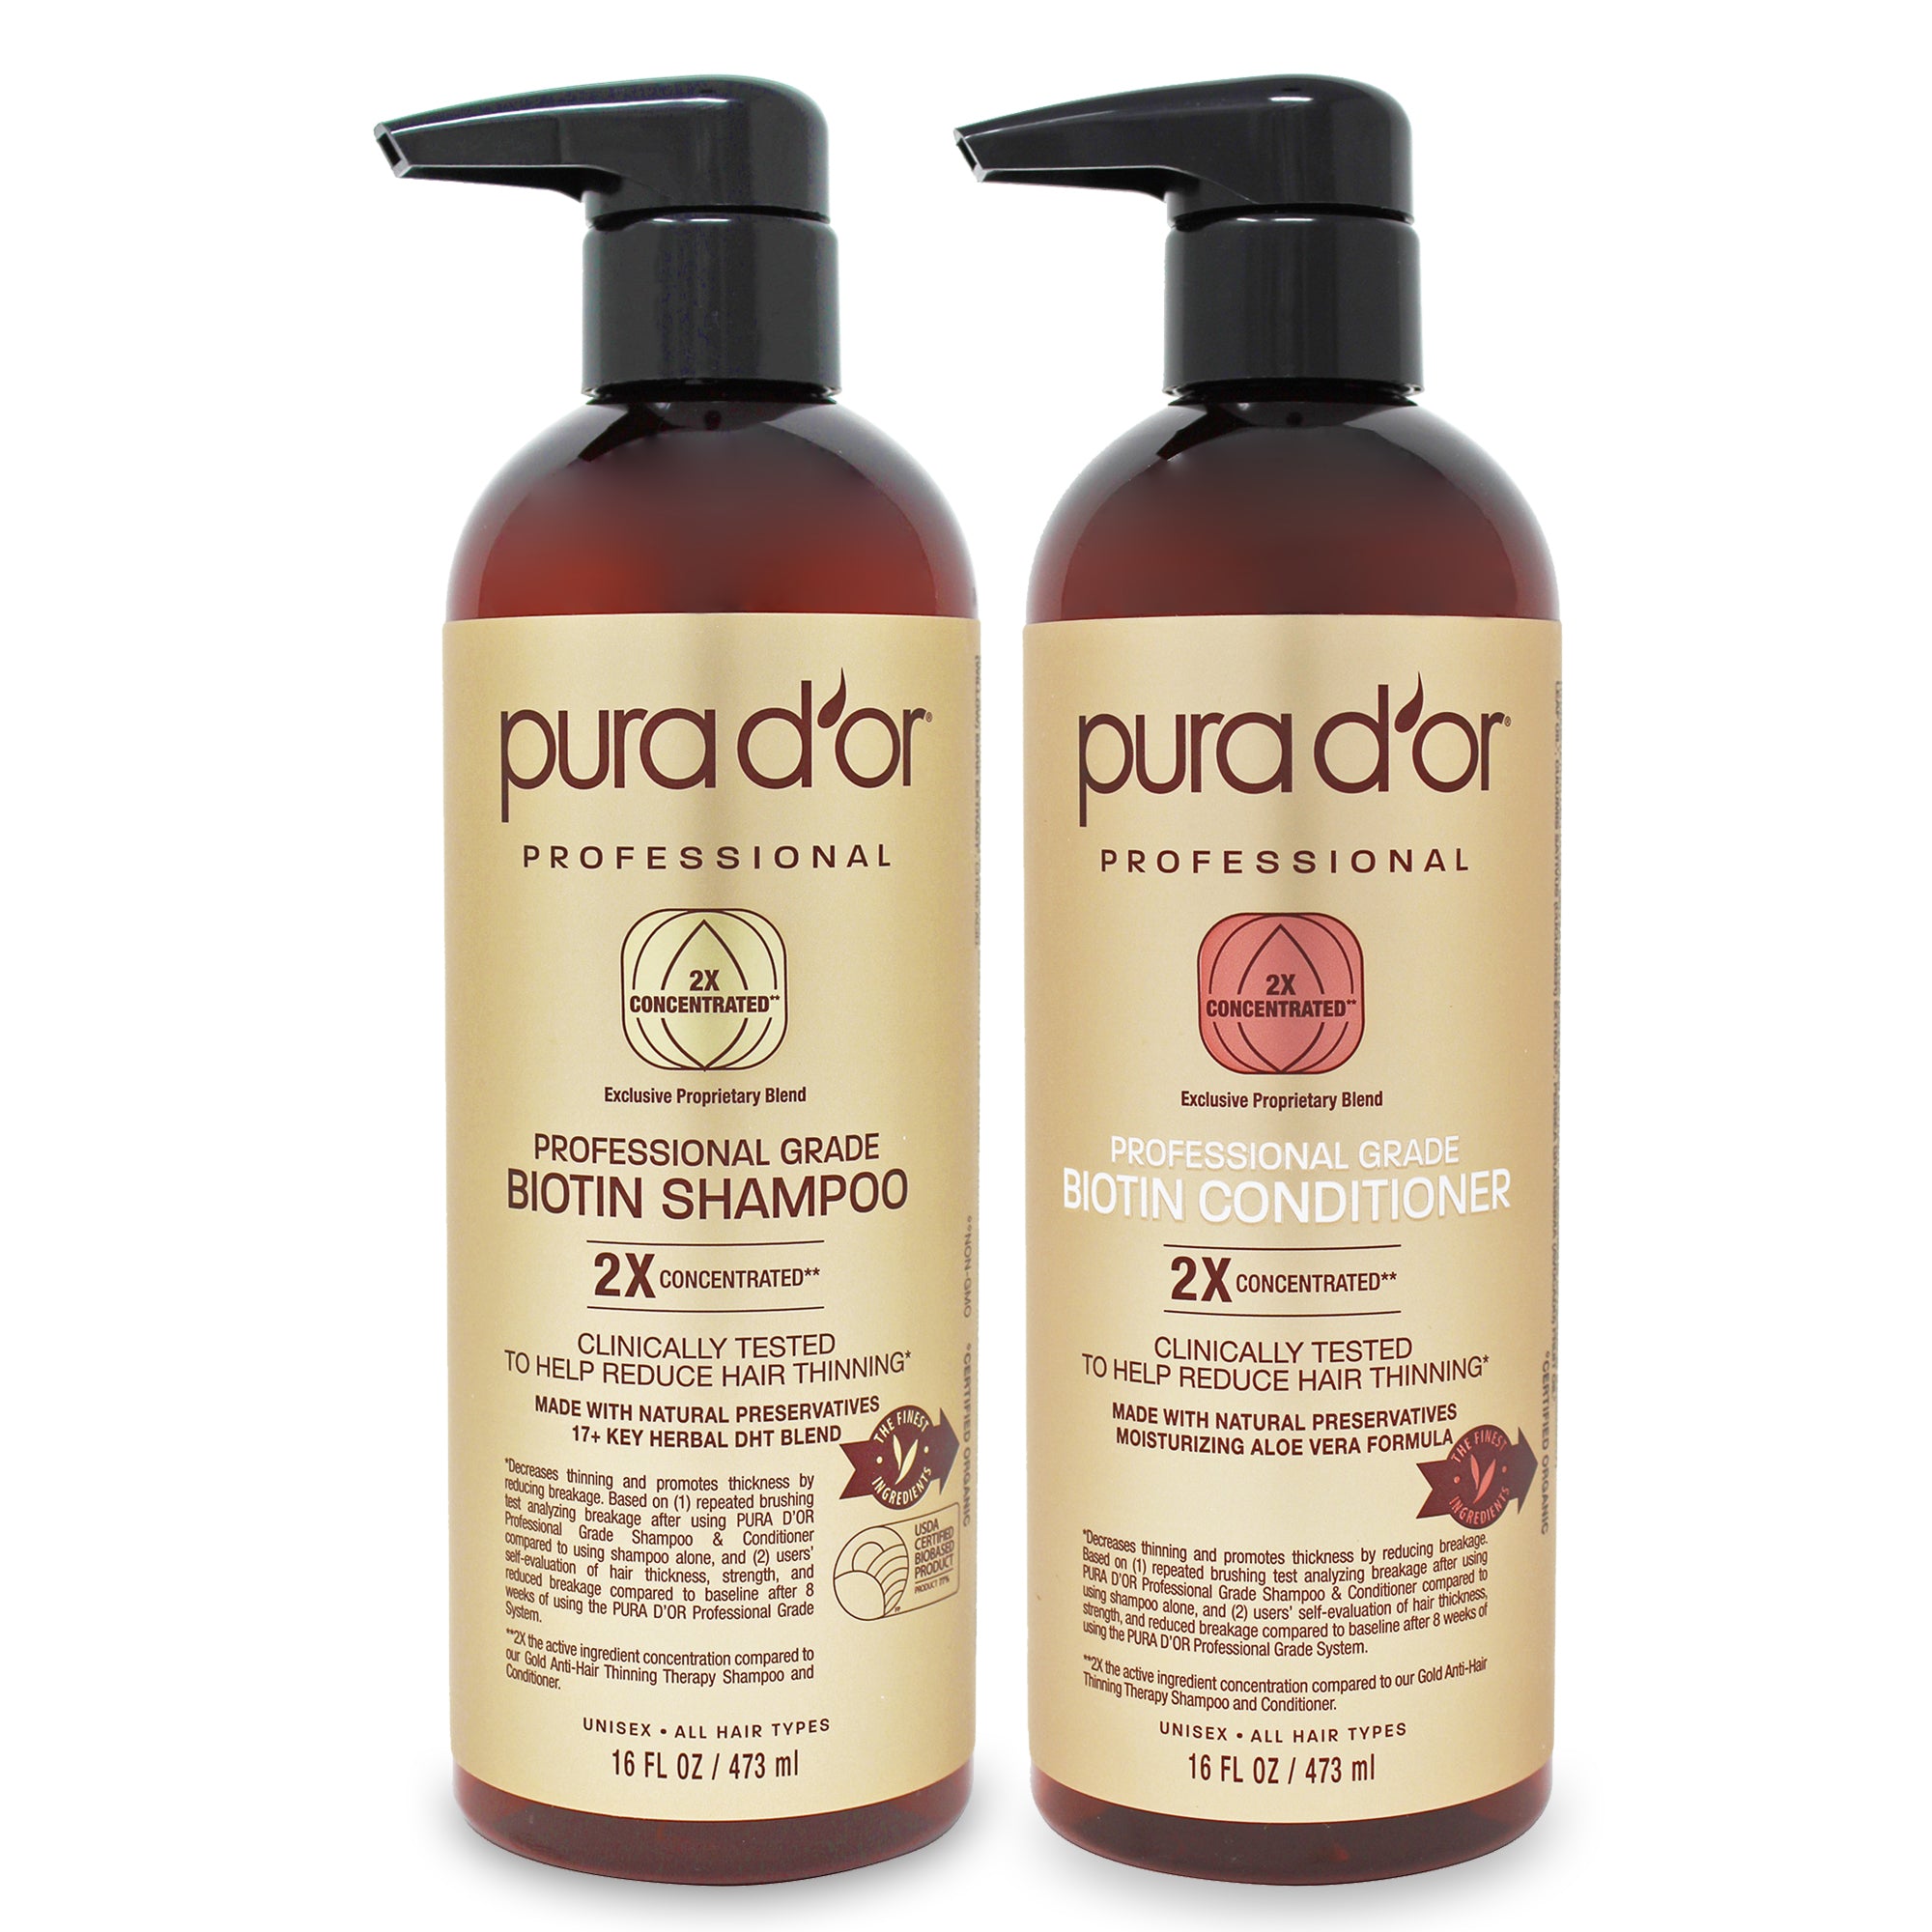 PURA D'OR Anti-Thinning Professional Grade Biotin Shampoo & Conditioner Set, Clinically Proven, 2X Concentrated DHT Blocker Hair Thickening Products For Women & Men, All Natural Shampoo, 16oz x 2